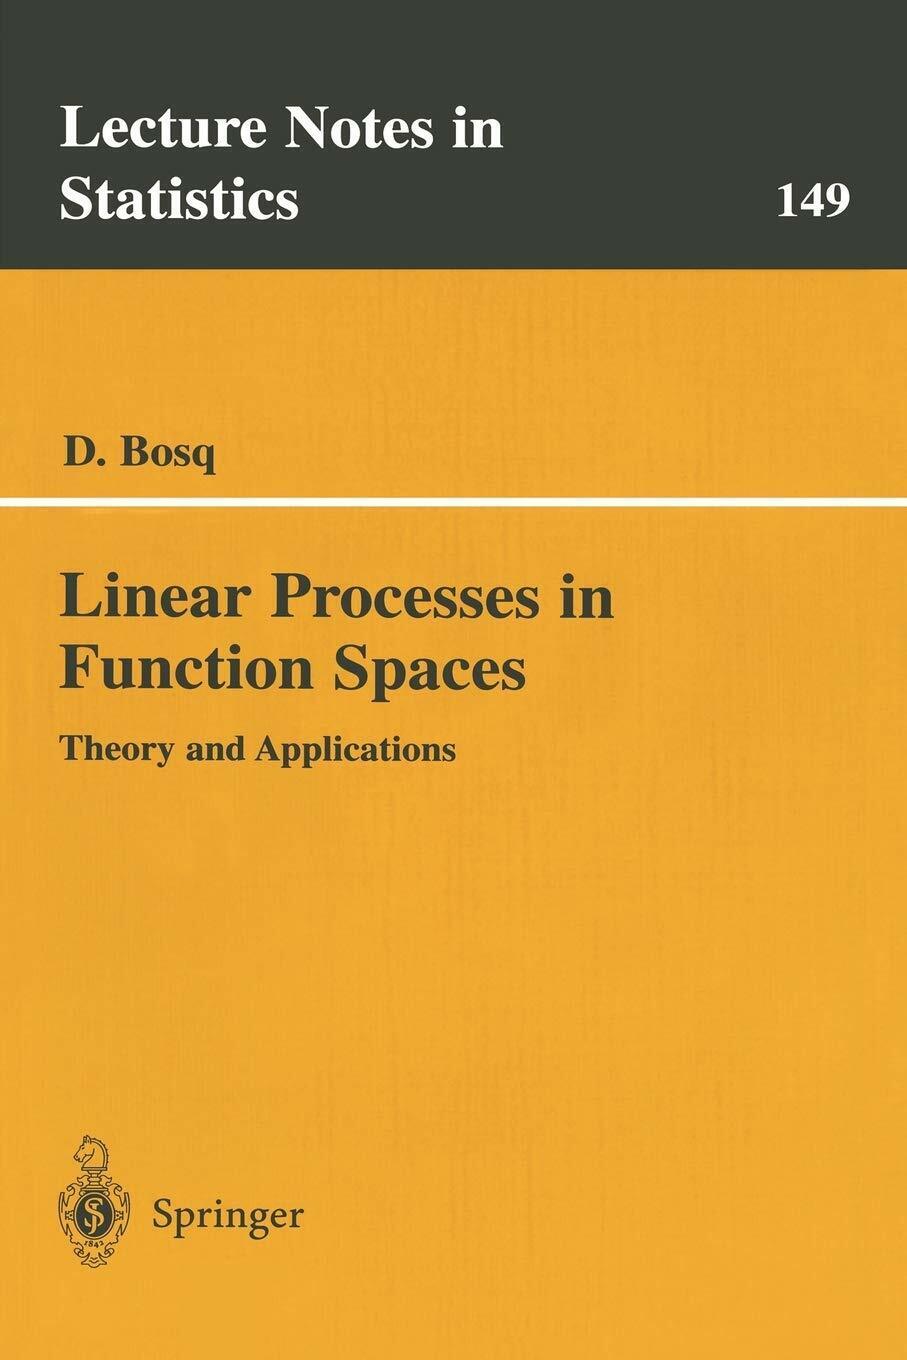 Linear Processes in Function Spaces - Denis Bosq - Springer, 2013 